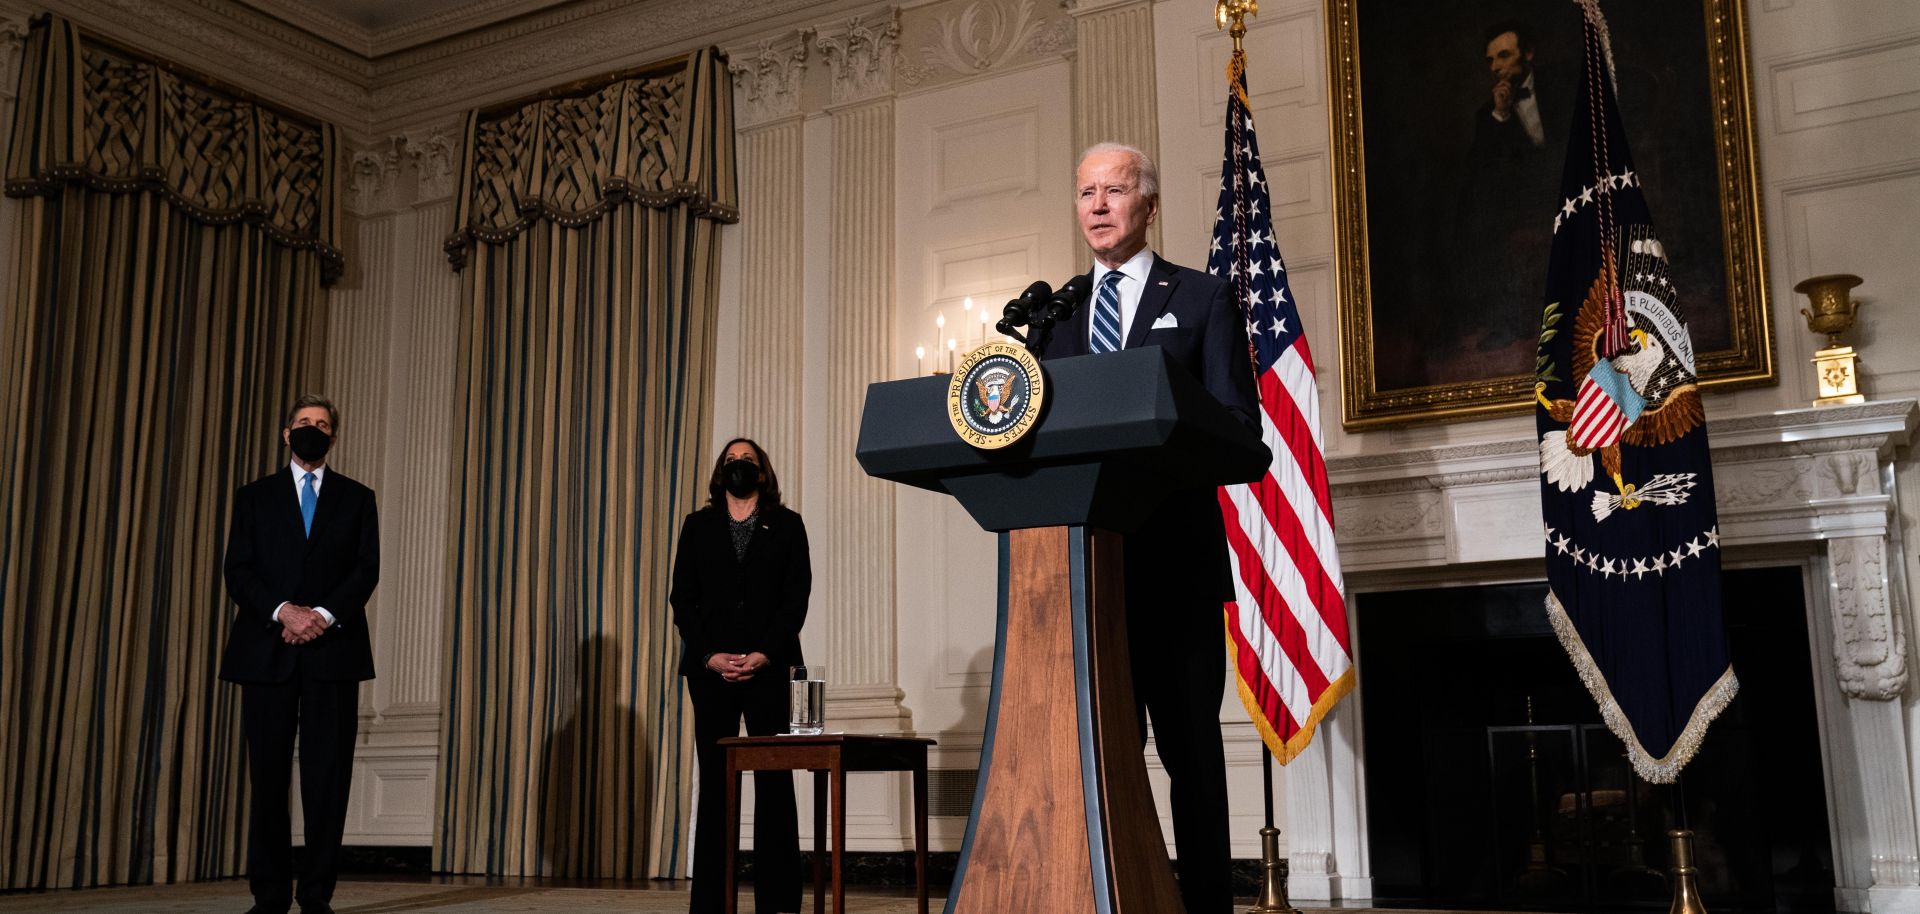 U.S. President Joe Biden speaks about climate change issues at the White House on Jan. 27, 2021.